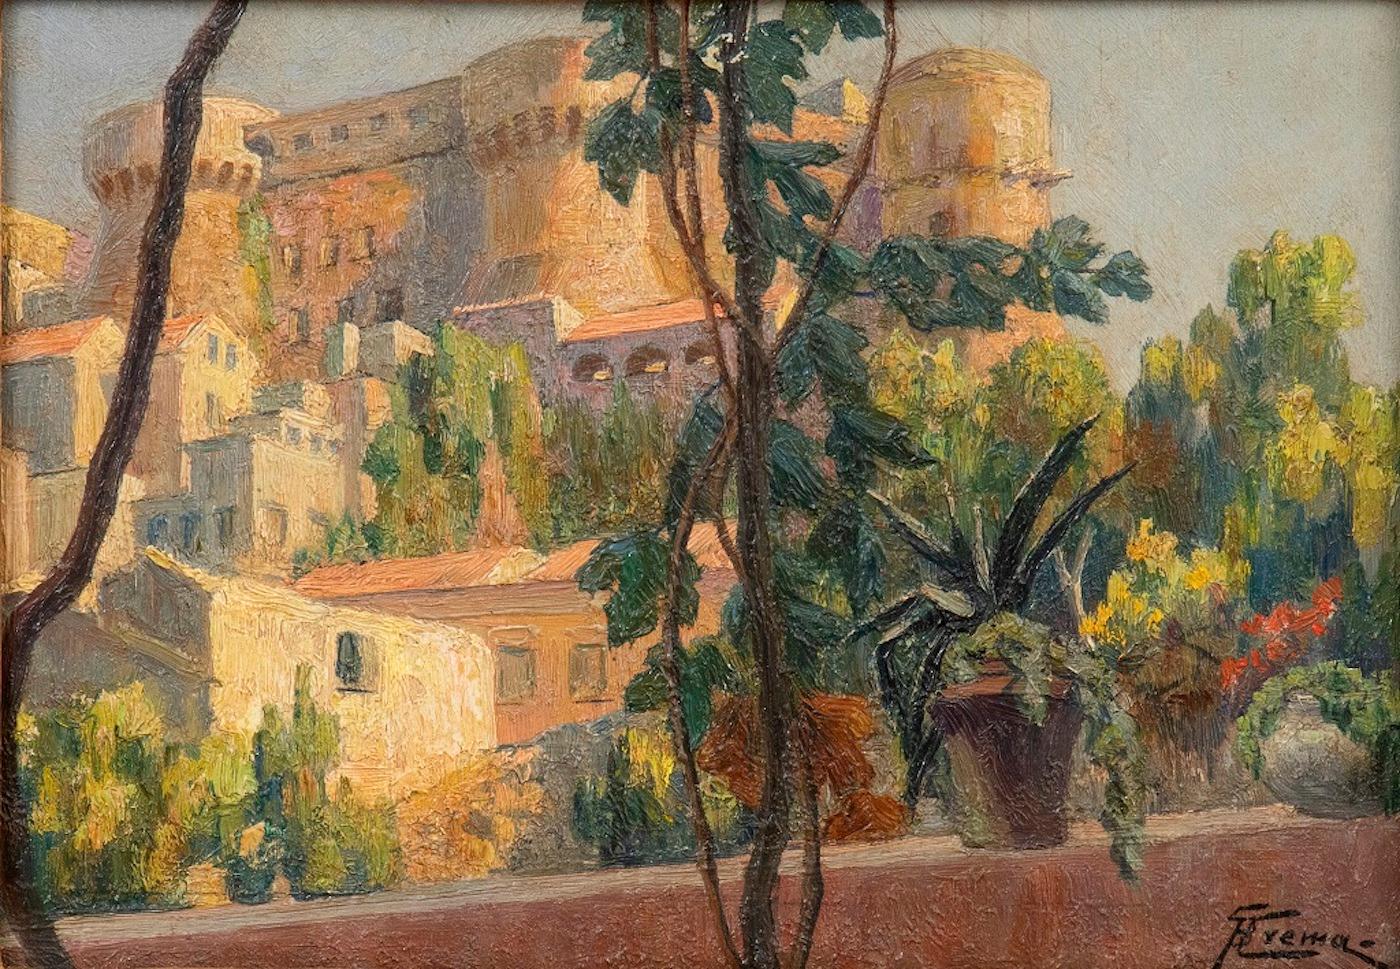 Castle on the Lake of Bracciano - Oil on Board by G. B. Crema - 1920s